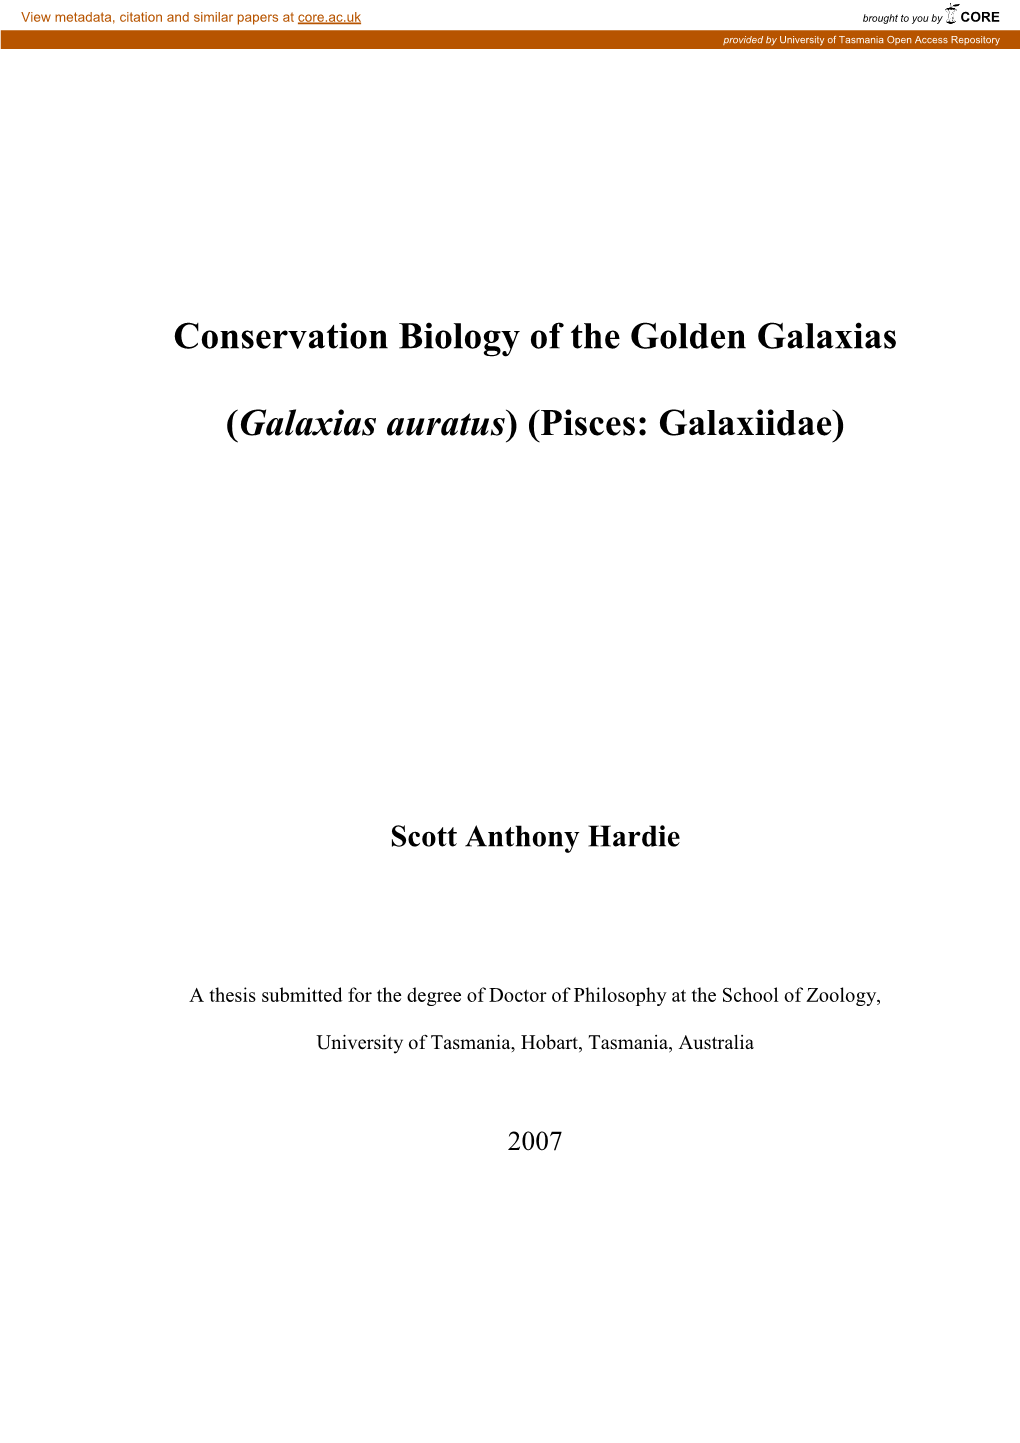 Conservation Biology of the Golden Galaxias (Front Section)